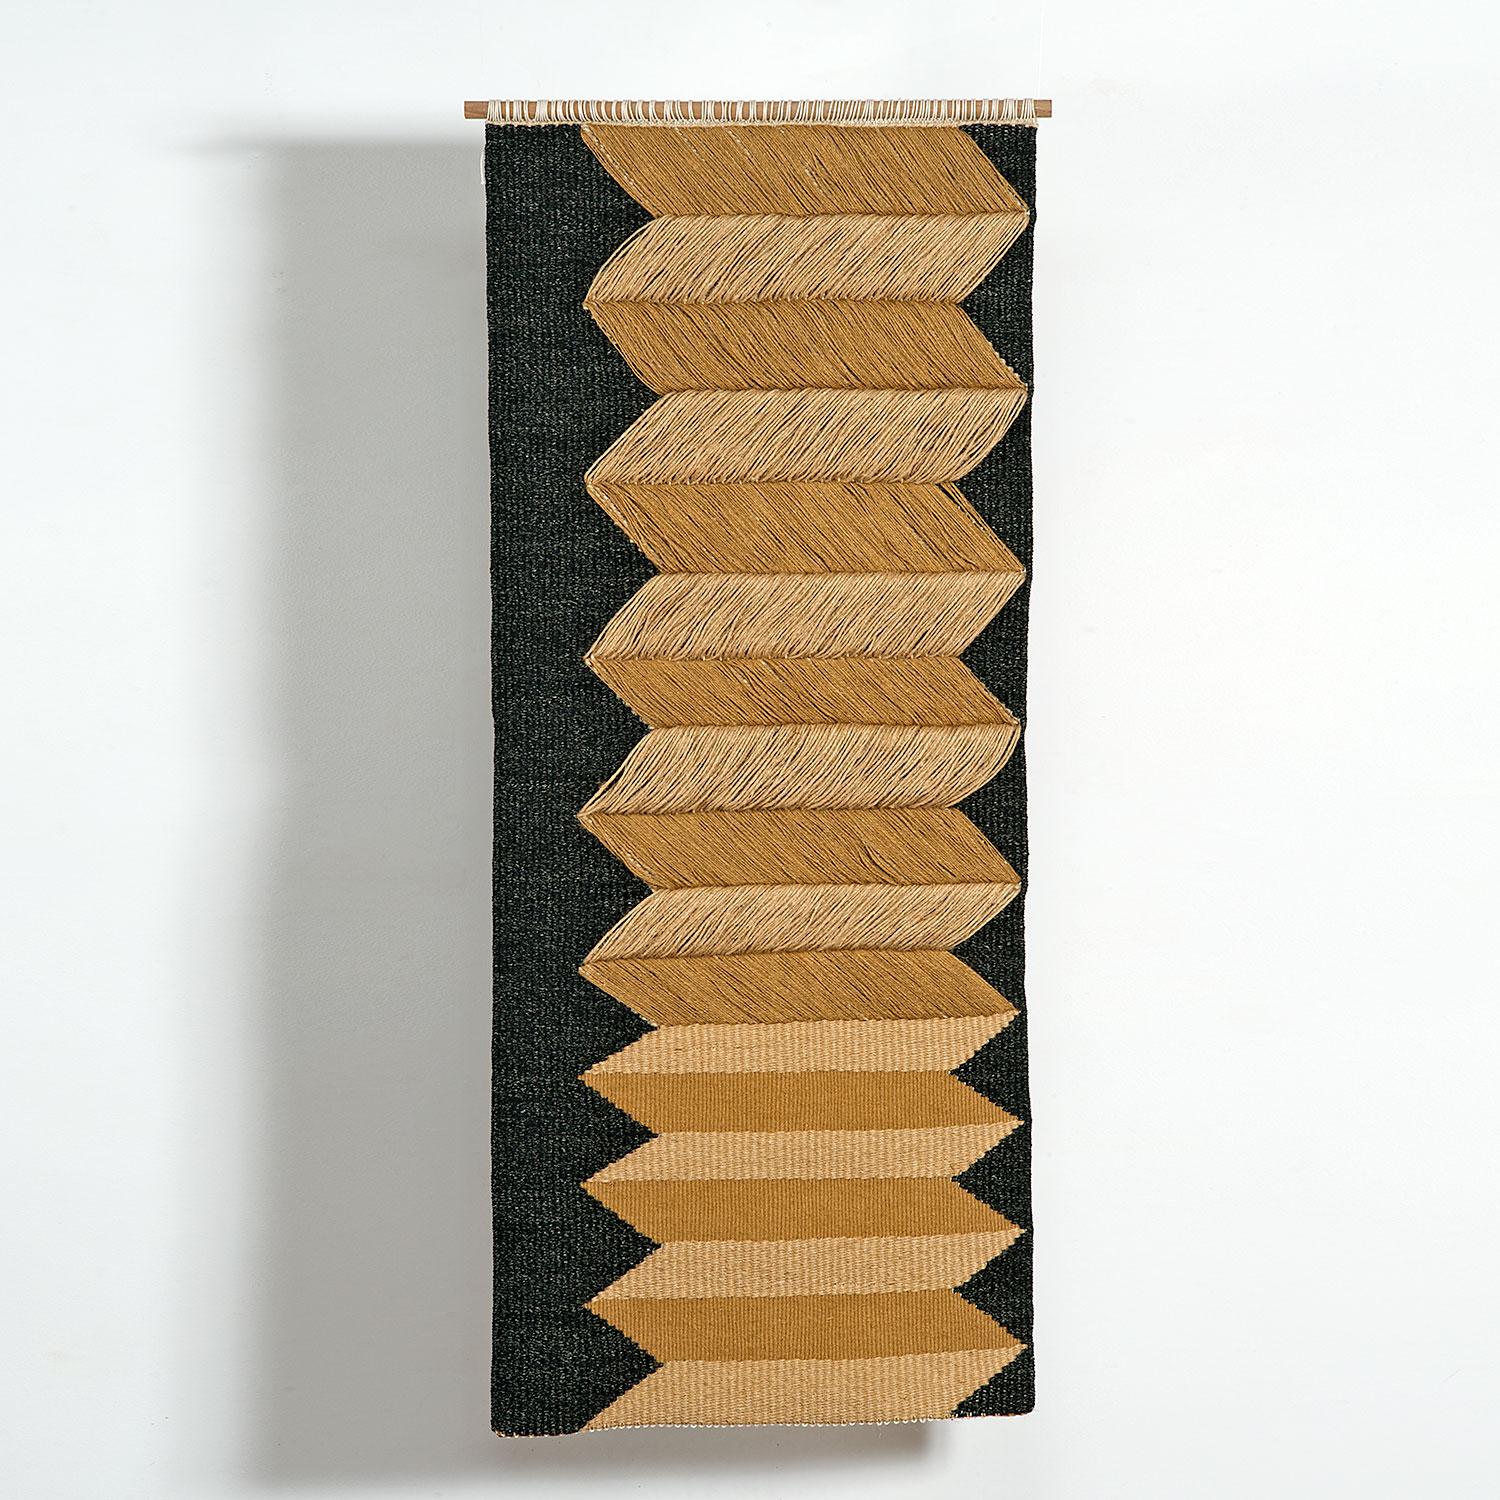 This handwoven contemporary textile sculpture, Brocado en Lino, was done by Chilean fiber artist, Carolina Yrarrázaval (b. 1960). Yrarrázaval explains her inspiration and technique: 

"Throughout my entire artistic career I have devoted myself to